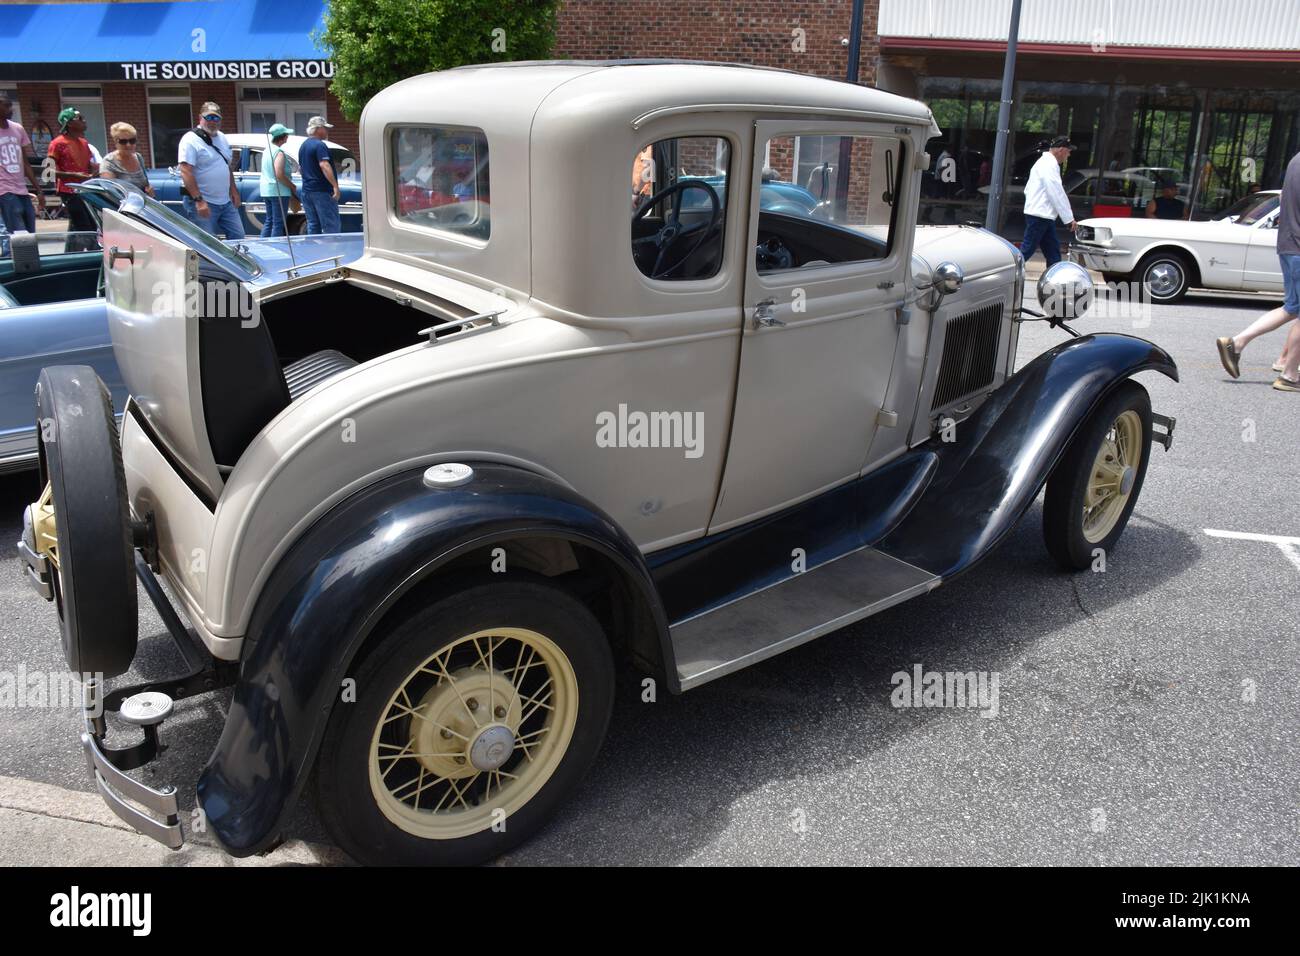 A 1930 Ford Model A with a Rumble Seat in the rear on display at a car show. Stock Photo